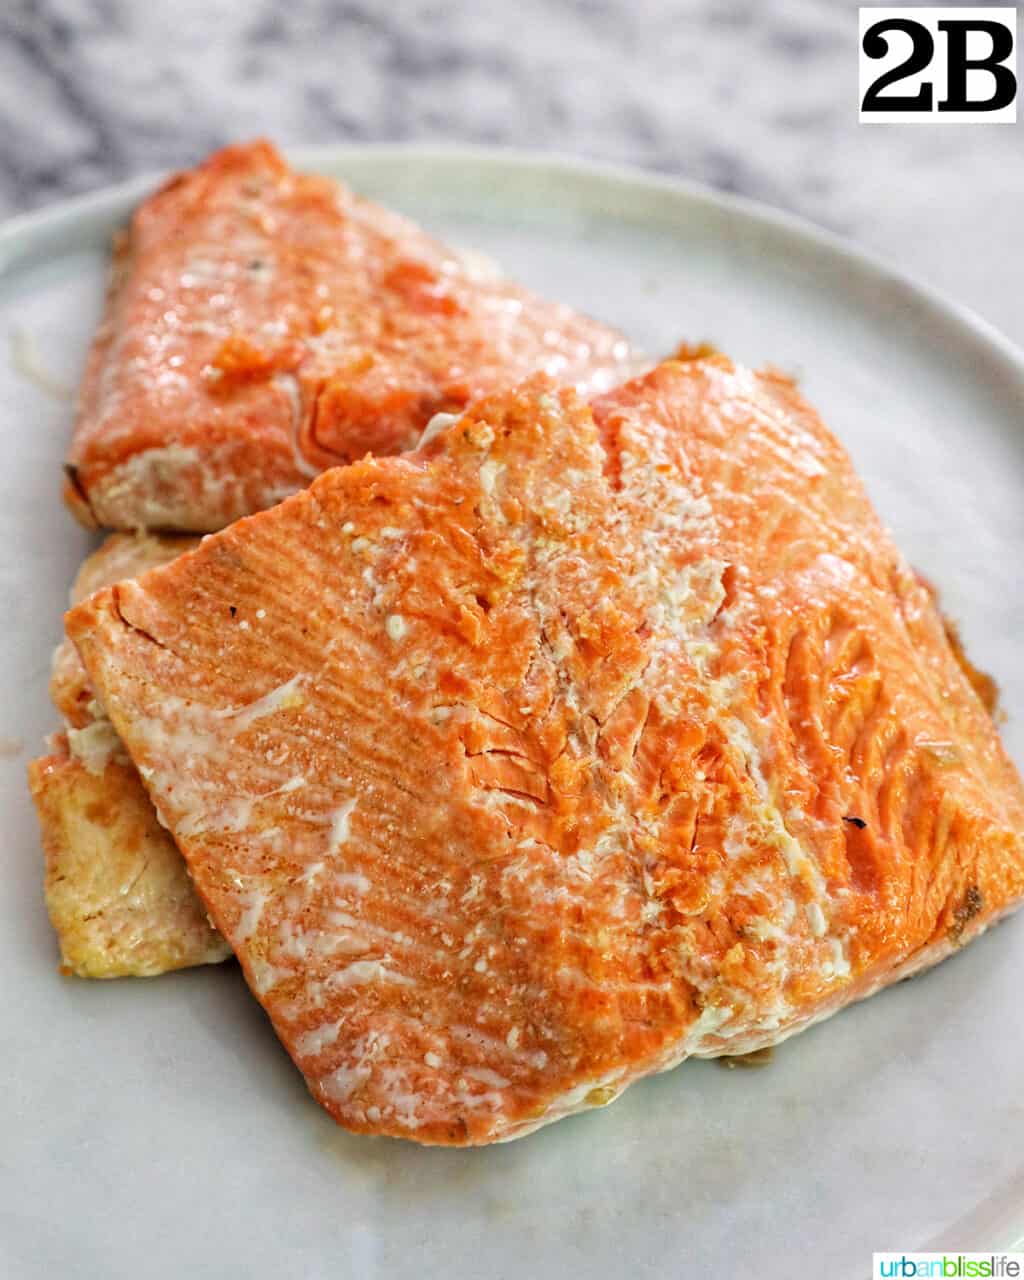 cooked salmon on a plate.